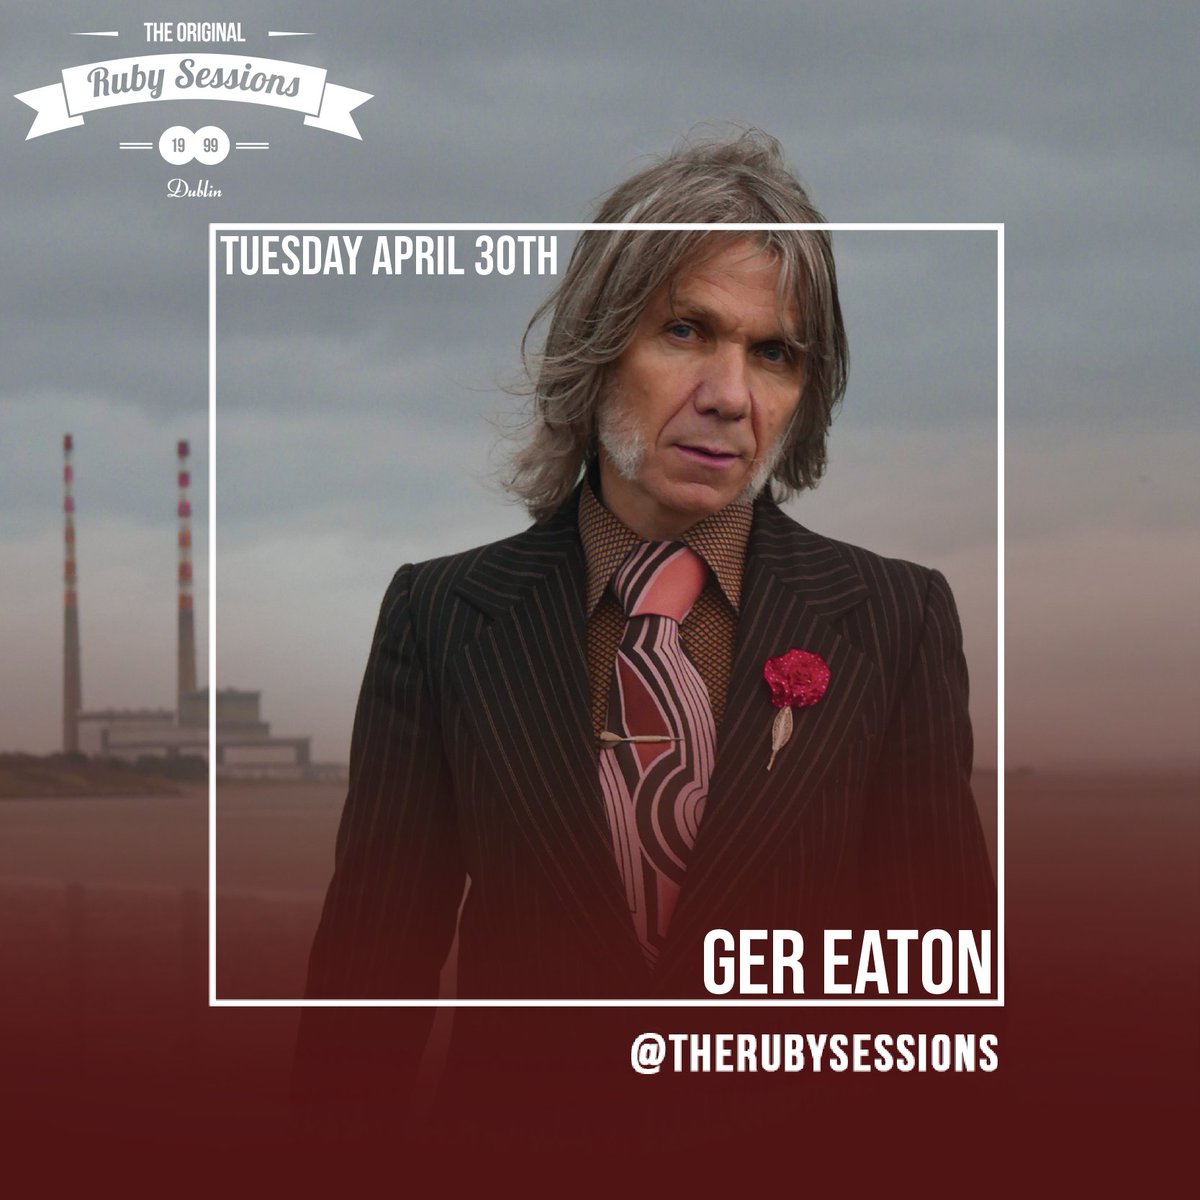 Delighted to be playing a few songs at The Ruby Sessions tomorrow night… @DimpleDiscs @rubysessions